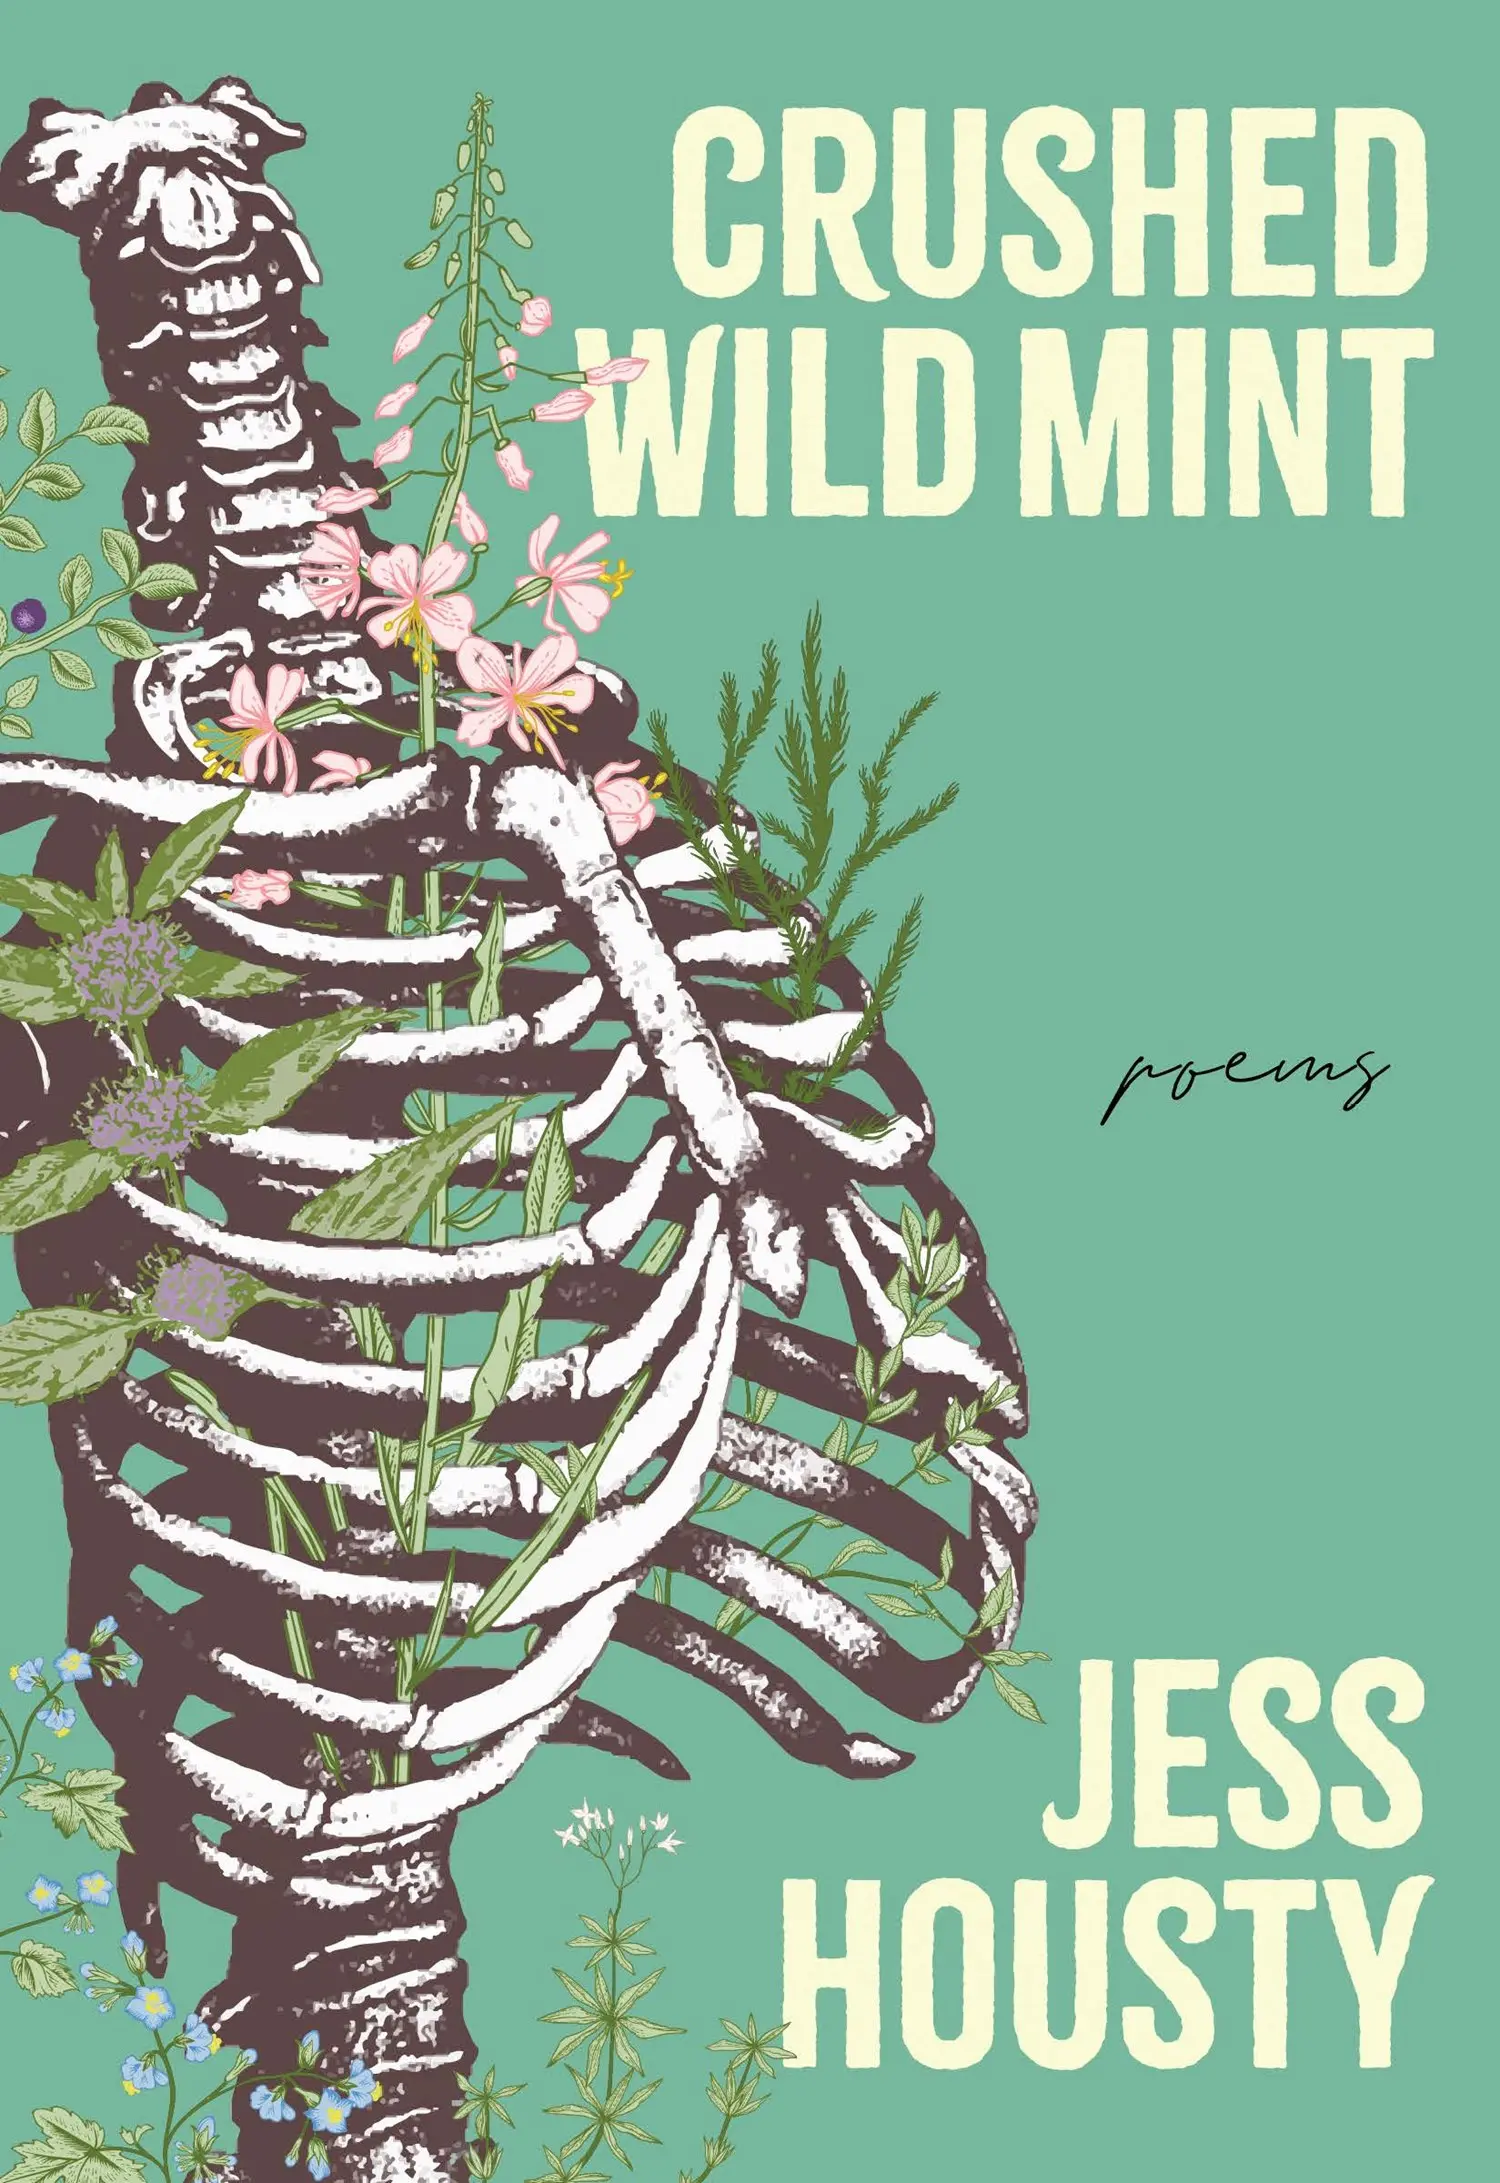 The cover of Crushed Wild Mint by Jess Housty.